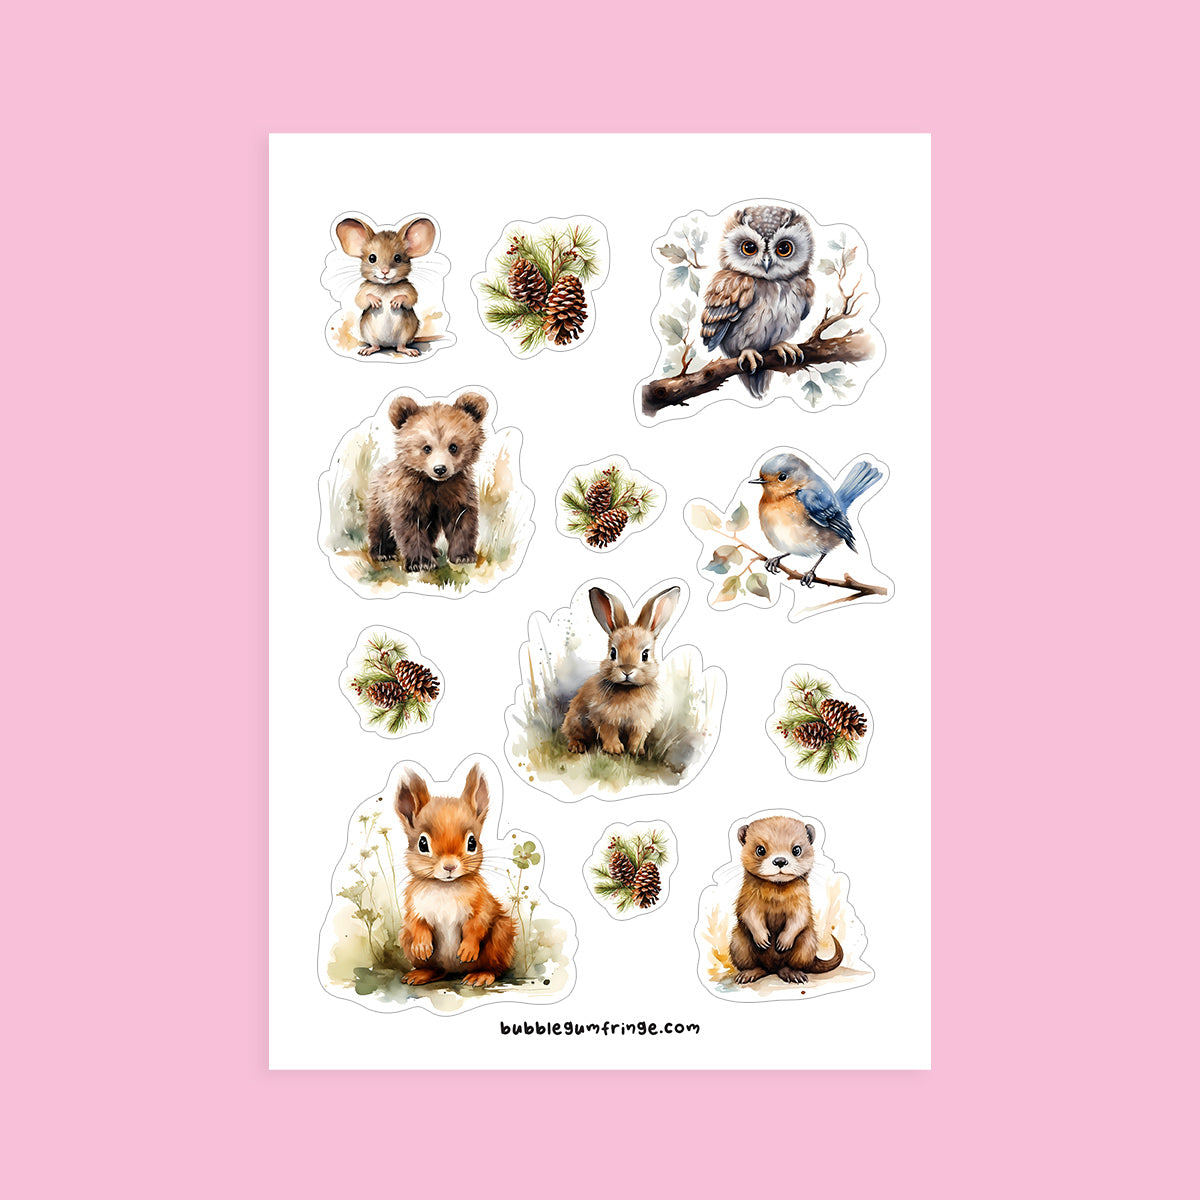 Sticker sheet with watercolor illustrations of woodland animals - style 2